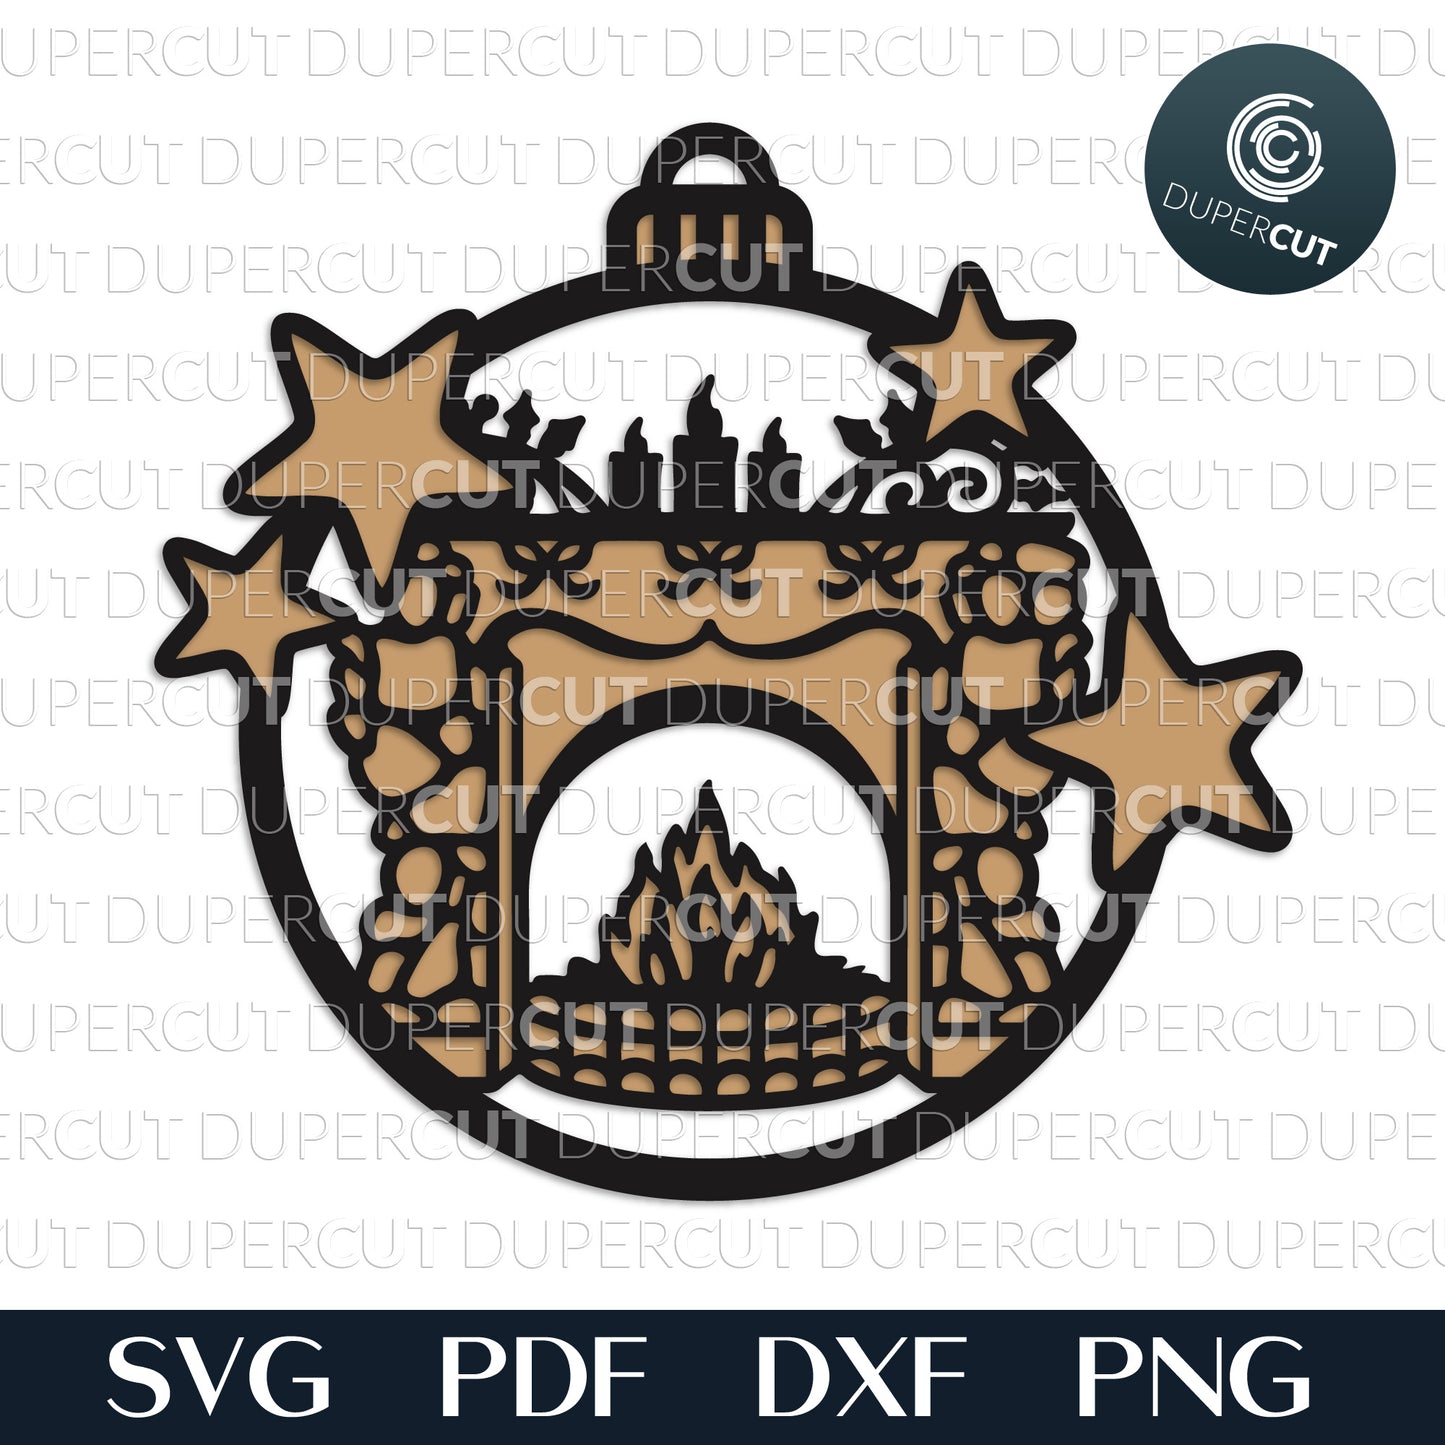 Fireplace stars ornament - layered cutting template - SVG DXF PDF vector files for laser engraving and cutting, Glowforge, Cricut, Silhouette Cameo